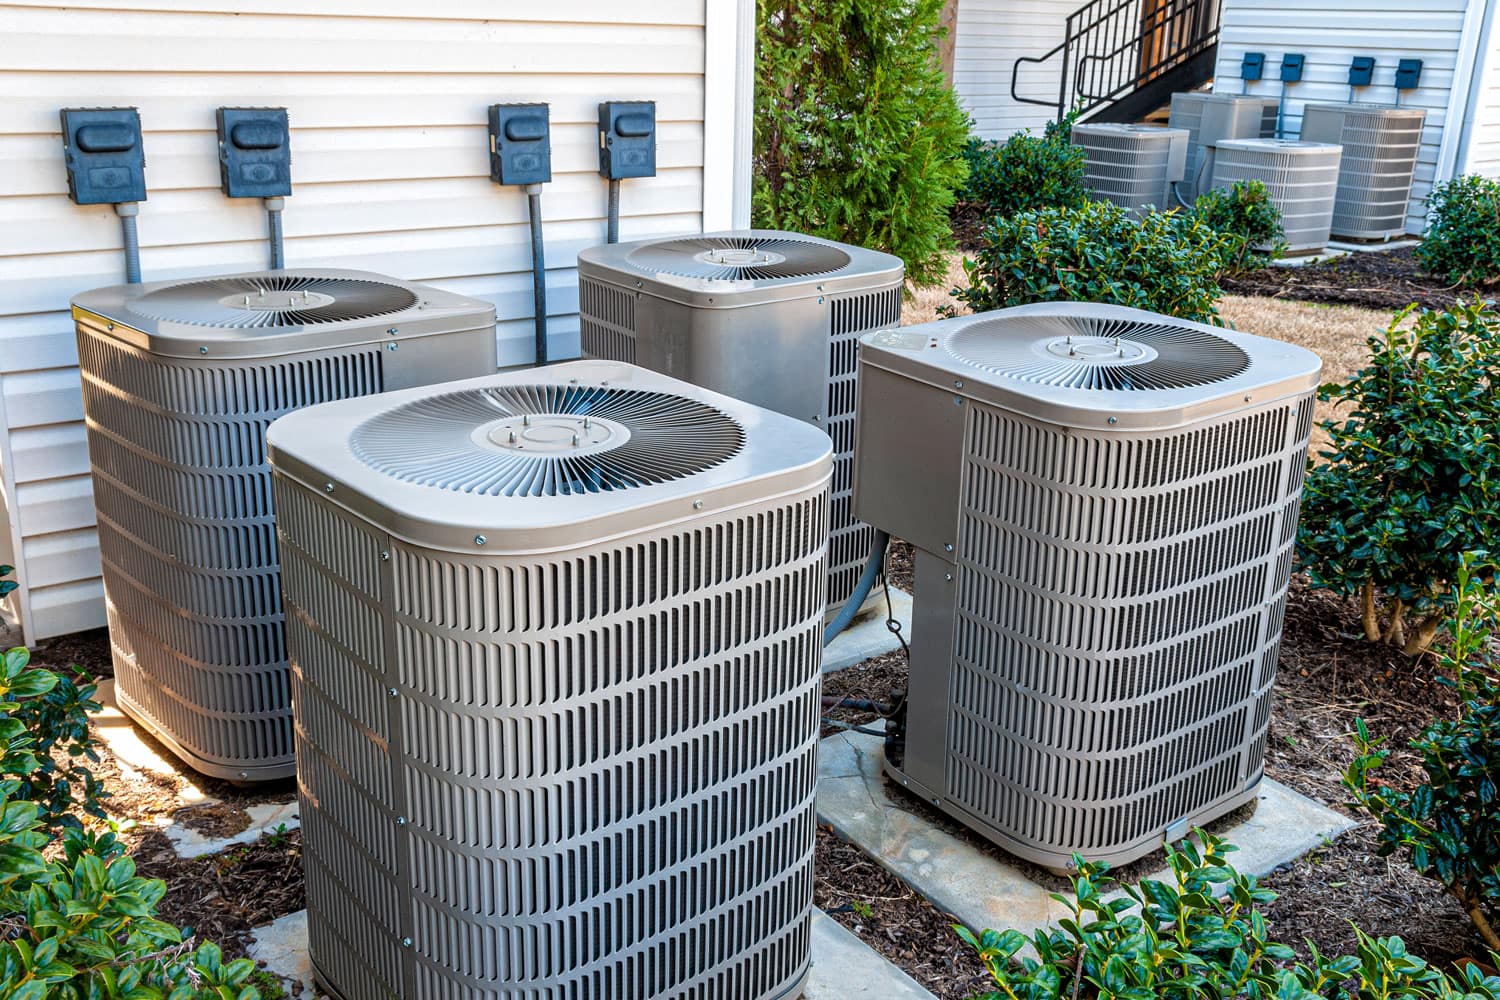 Four air conditioning condenser units placed outside